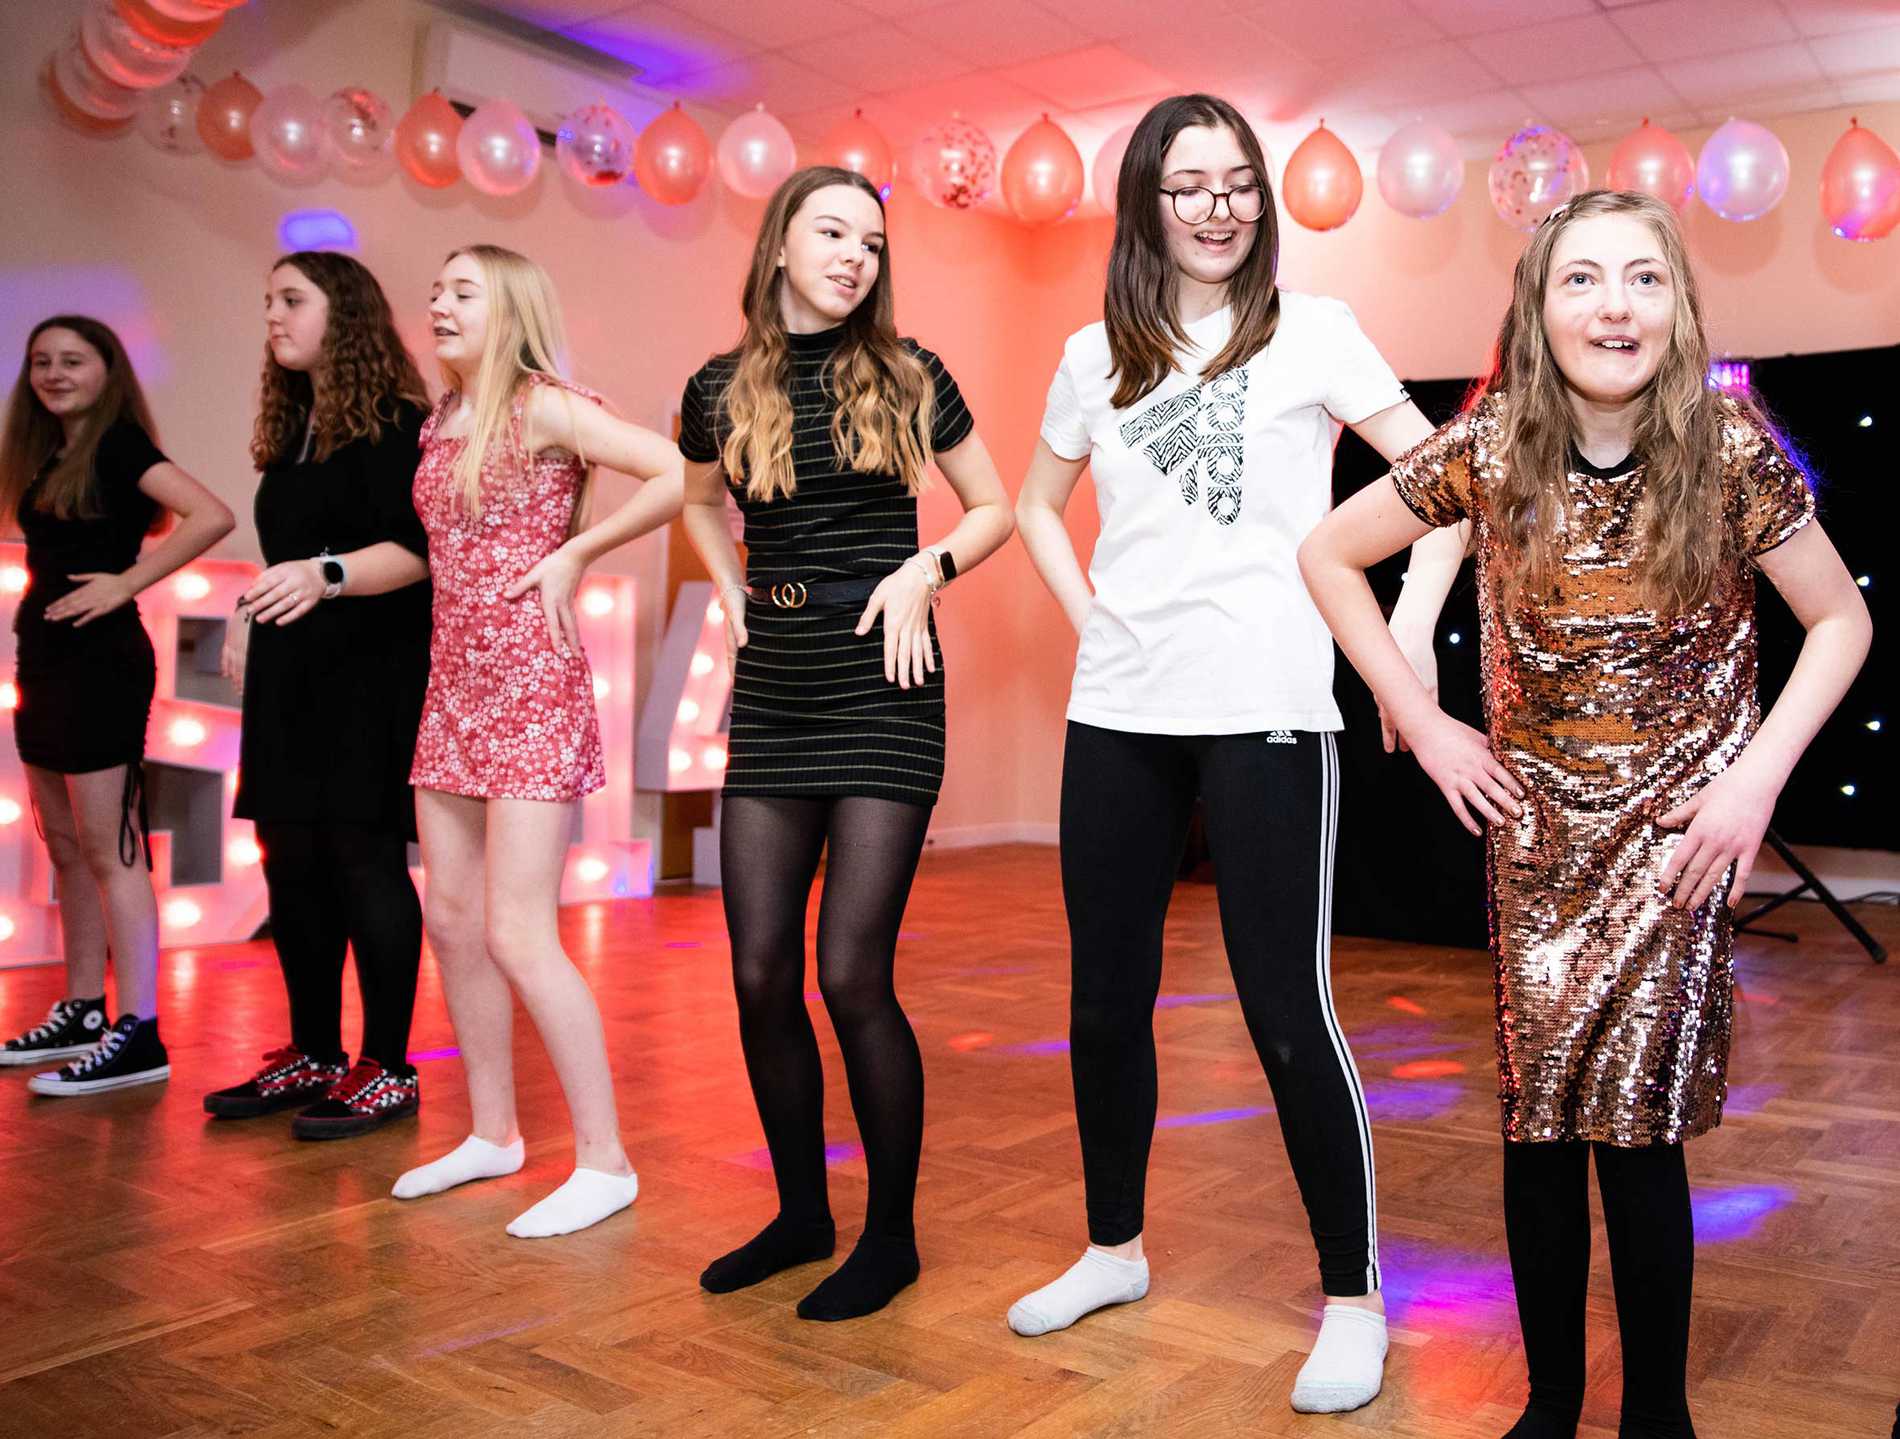 Eloise and her friends dancing during her party.